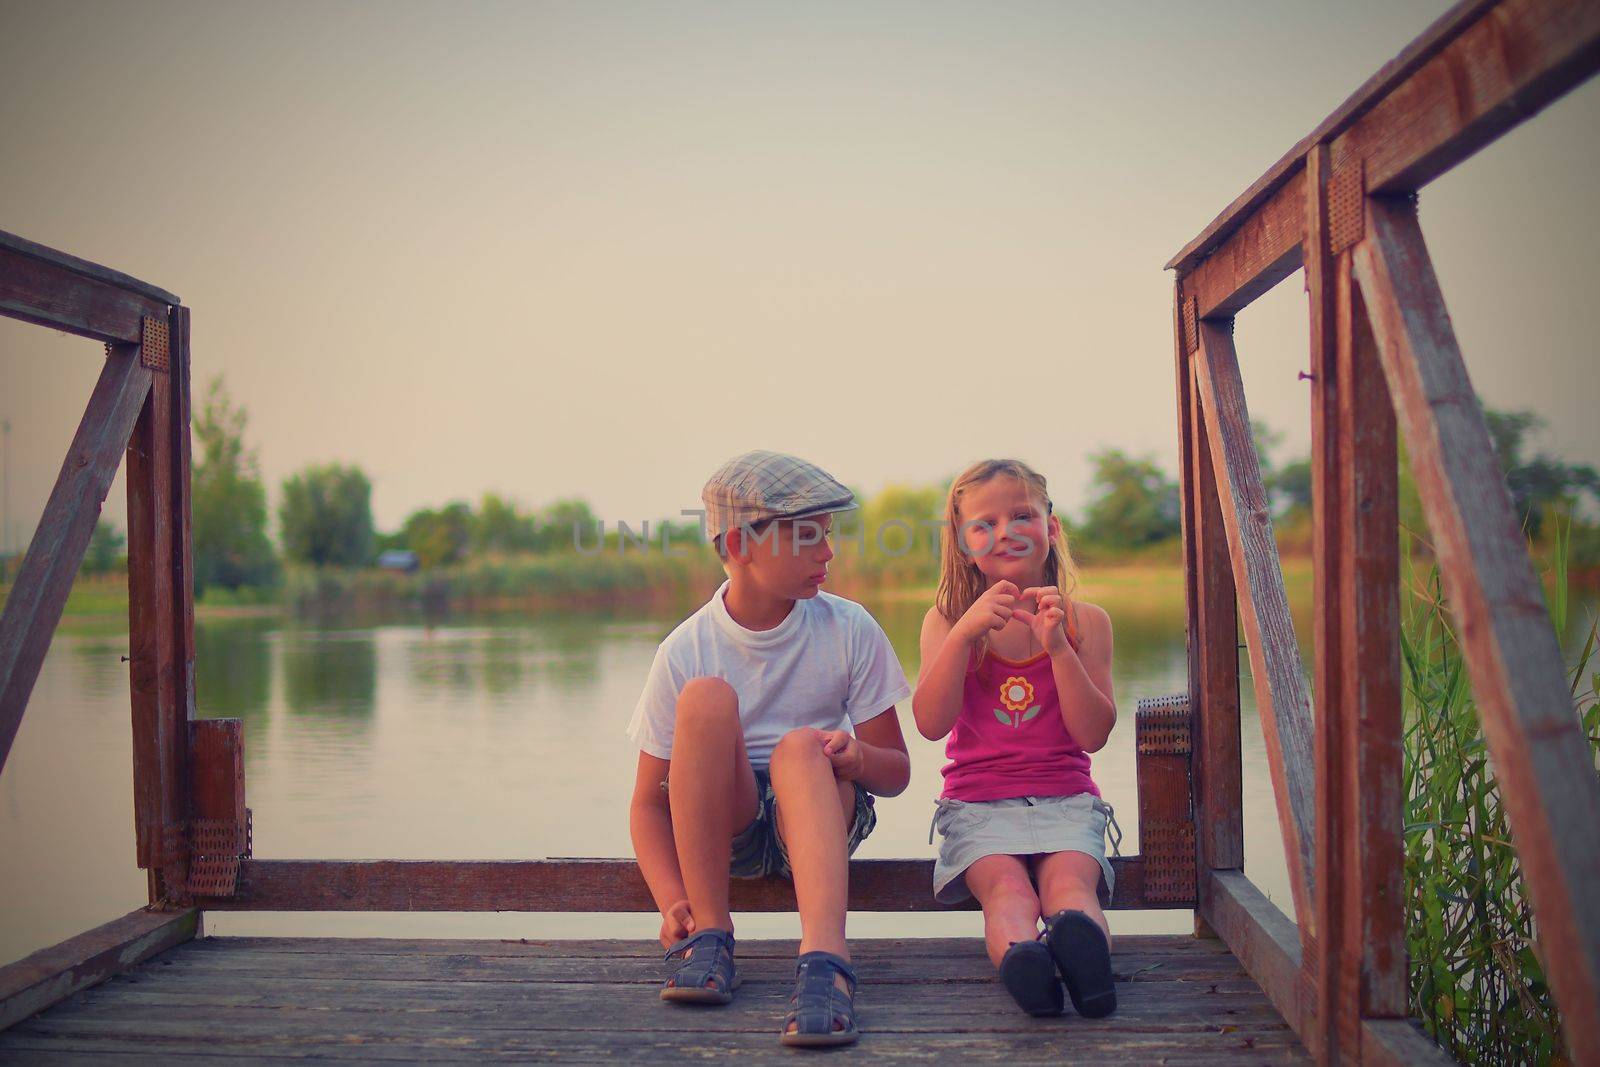 Children sitting on pier. Two children of different age - elementary age boy and preschool girl sitting on a wooden pier. Girl making heart shape. Summer and childhood concept. 